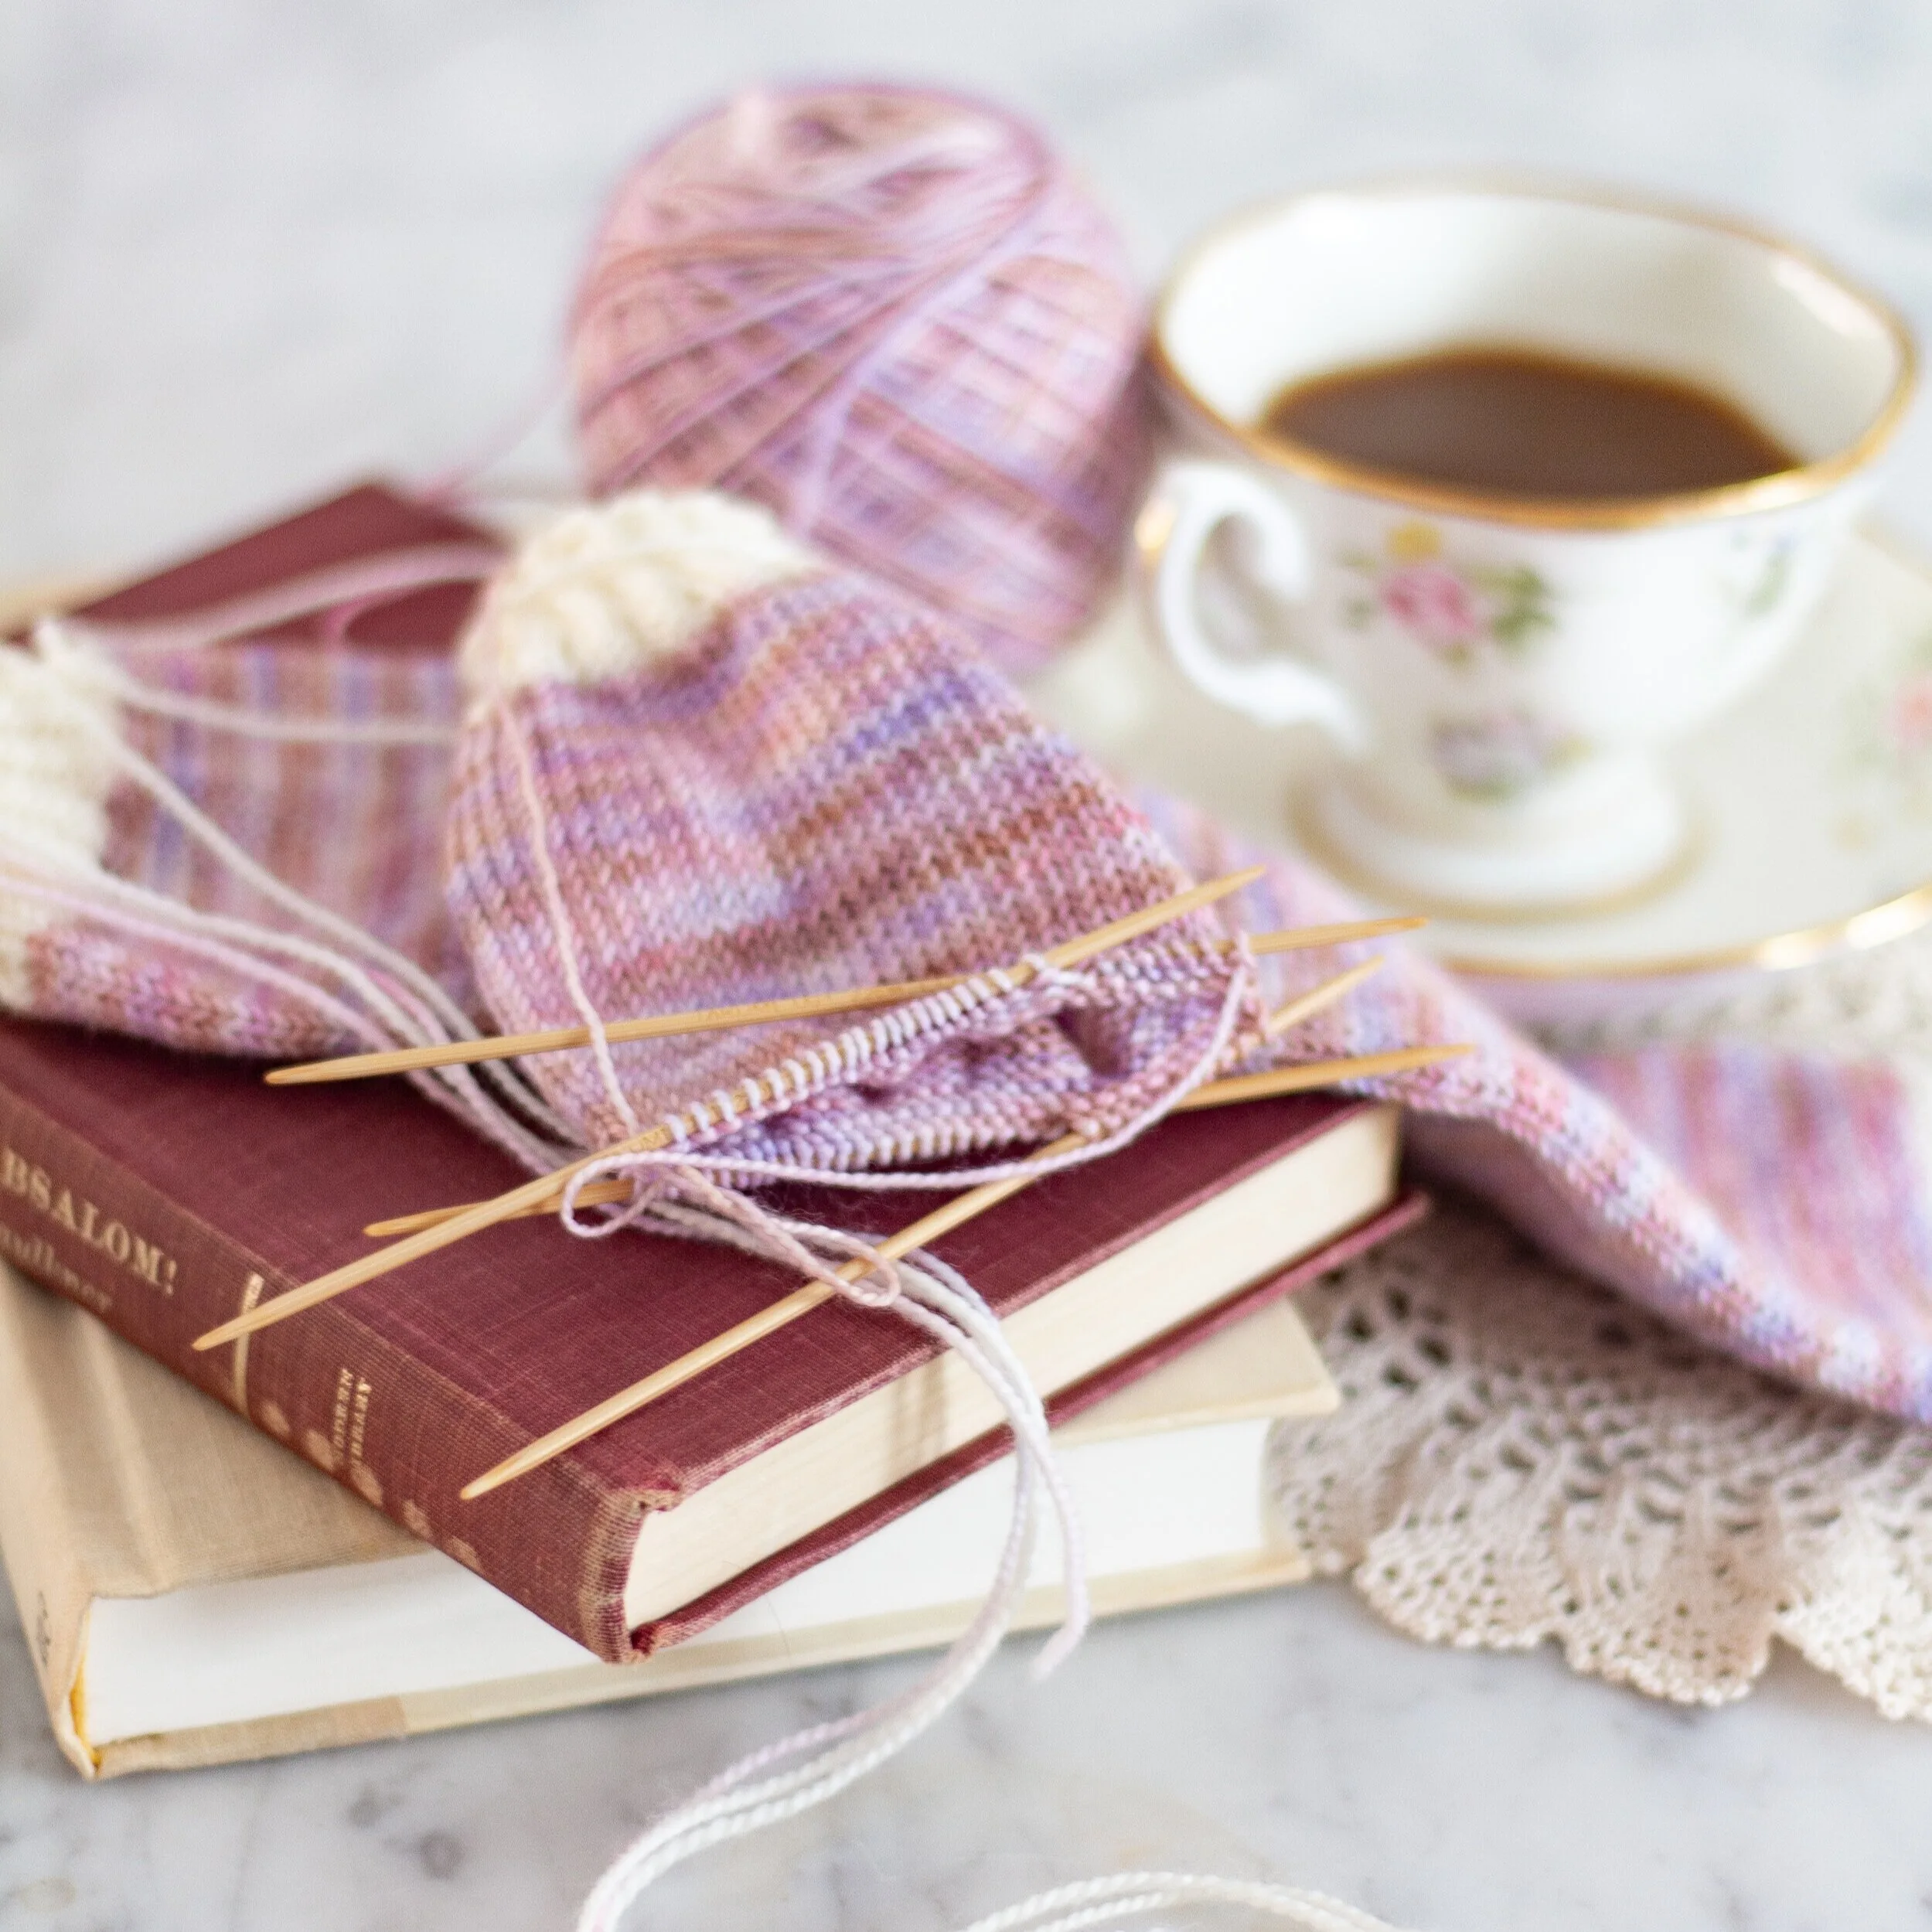 A partially-finished pair of variegated pink and white socks sit on top of a small stack of books. A teacup is slightly blurred in the background. Yarn substitution helped me learn how to use different yarn for socks, sweaters, hats, and more.